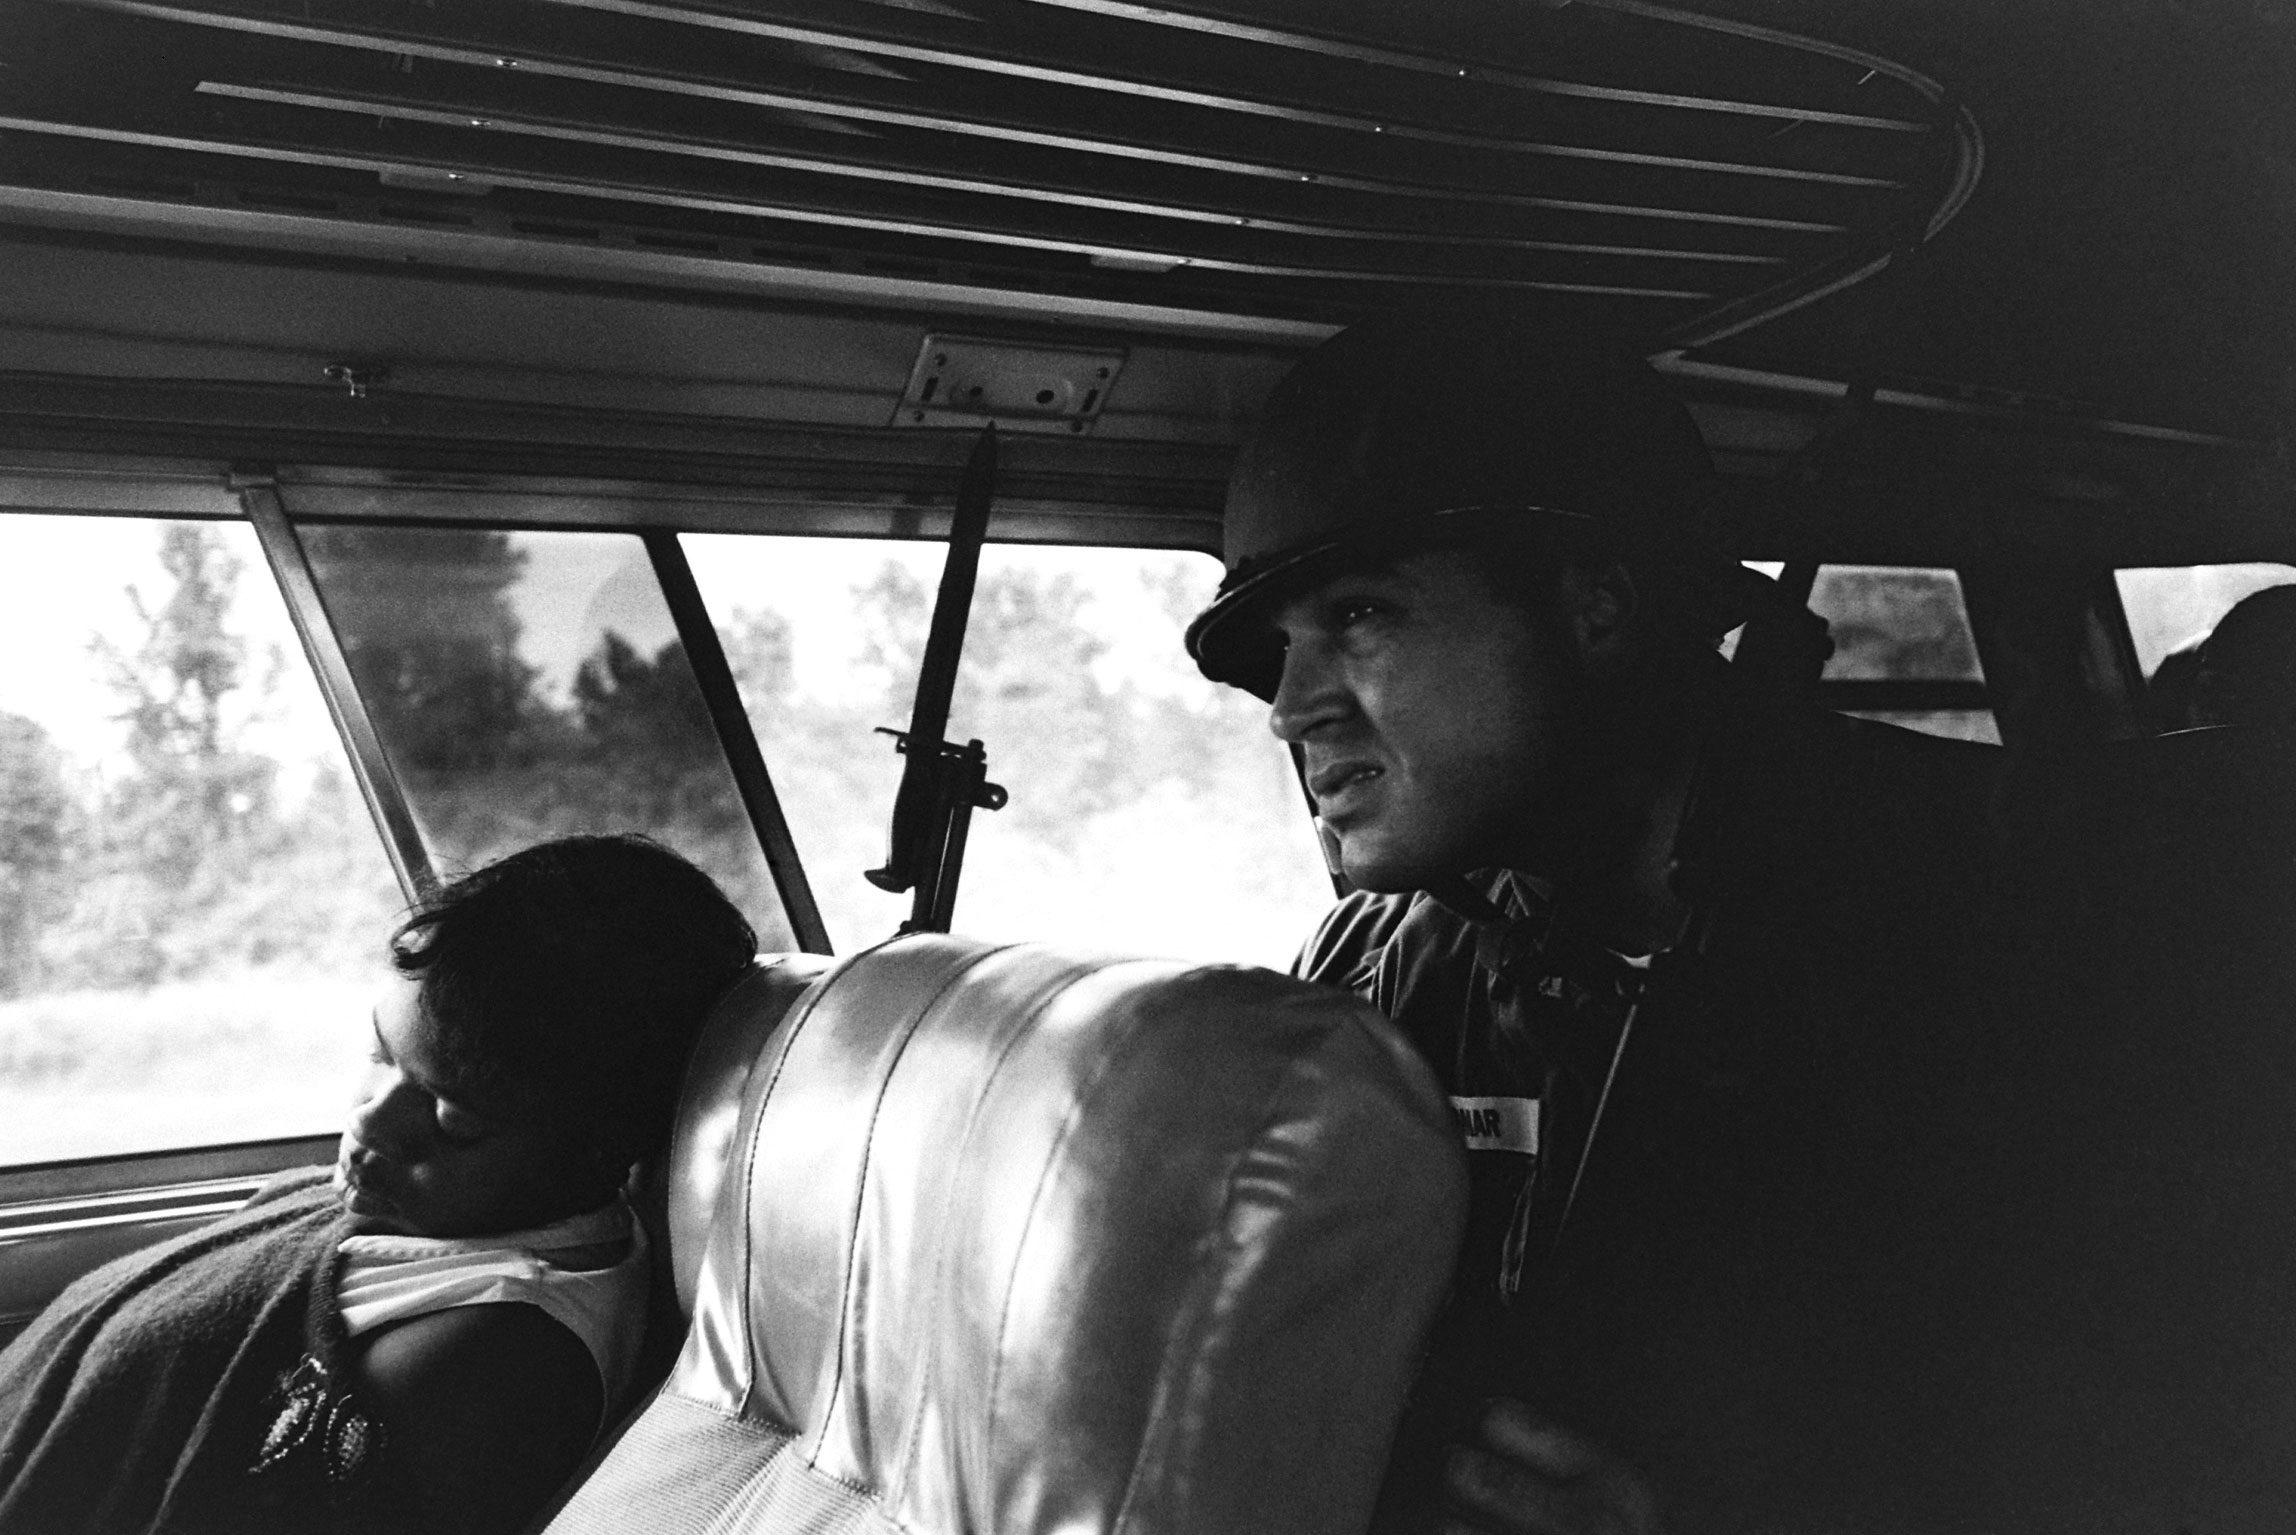 A freedom rider and member of the National Guard on a bus in the Deep South.